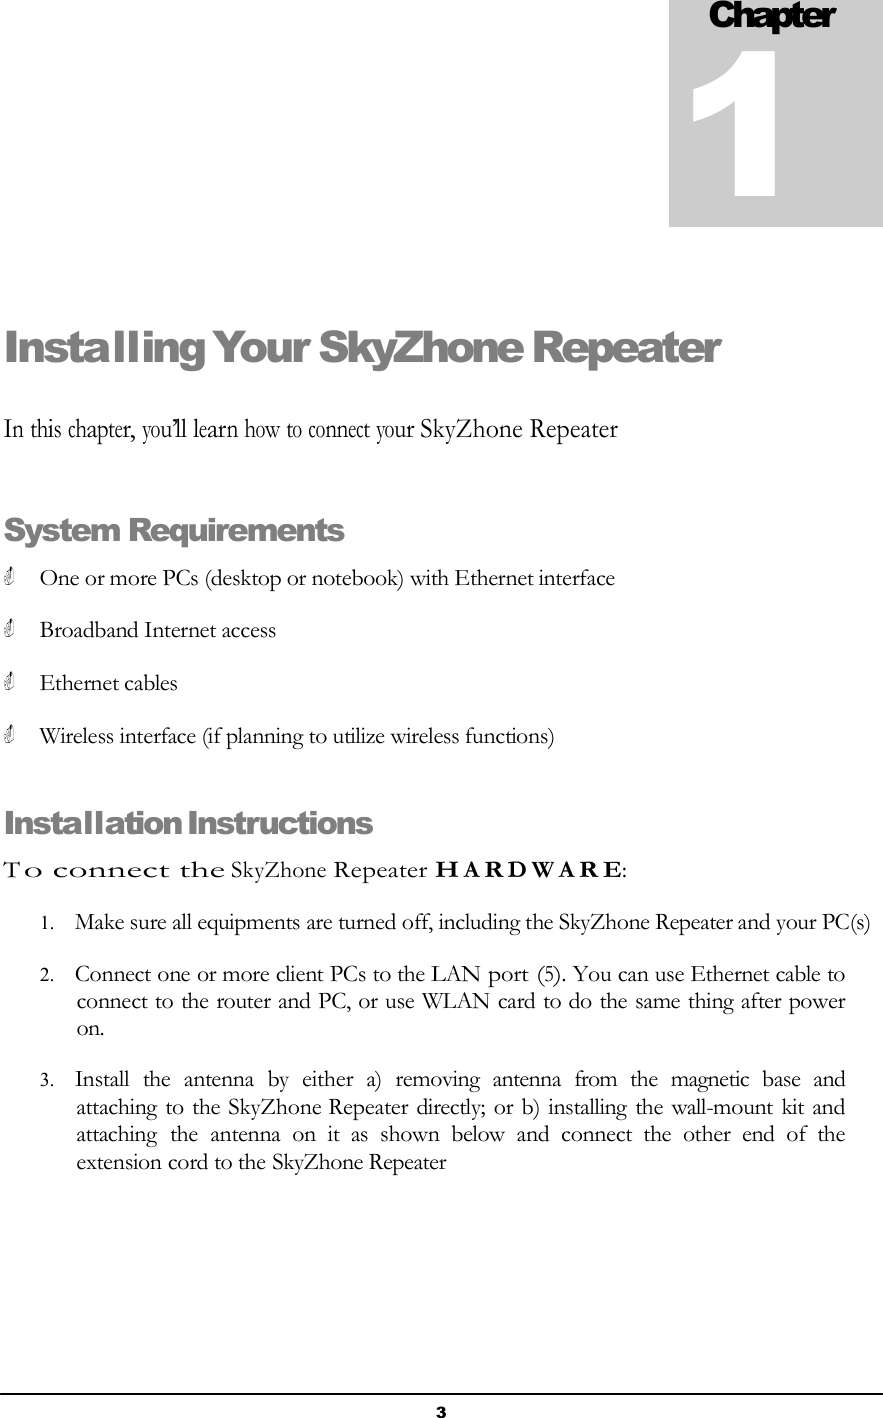 3    Chapter 1     Installing Your SkyZhone Repeater     In this chapter, you’ll learn how to connect your SkyZhone Repeater    System Requirements   One or more PCs (desktop or notebook) with Ethernet interface   Broadband Internet access   Ethernet cables   Wireless interface (if planning to utilize wireless functions)   Installation Instructions  T o connect the SkyZhone Repeater H A R D W A R E:  1. Make sure all equipments are turned off, including the SkyZhone Repeater and your PC(s)  2. Connect one or more client PCs to the LAN port (5). You can use Ethernet cable to connect to the router and PC, or use WLAN card to do the same thing after power on.  3. Install  the  antenna  by  either  a)  removing  antenna  from  the  magnetic  base  and attaching to the SkyZhone Repeater directly; or b) installing the wall-mount kit and attaching  the  antenna  on  it  as  shown  below  and  connect  the  other  end  of  the extension cord to the SkyZhone Repeater 